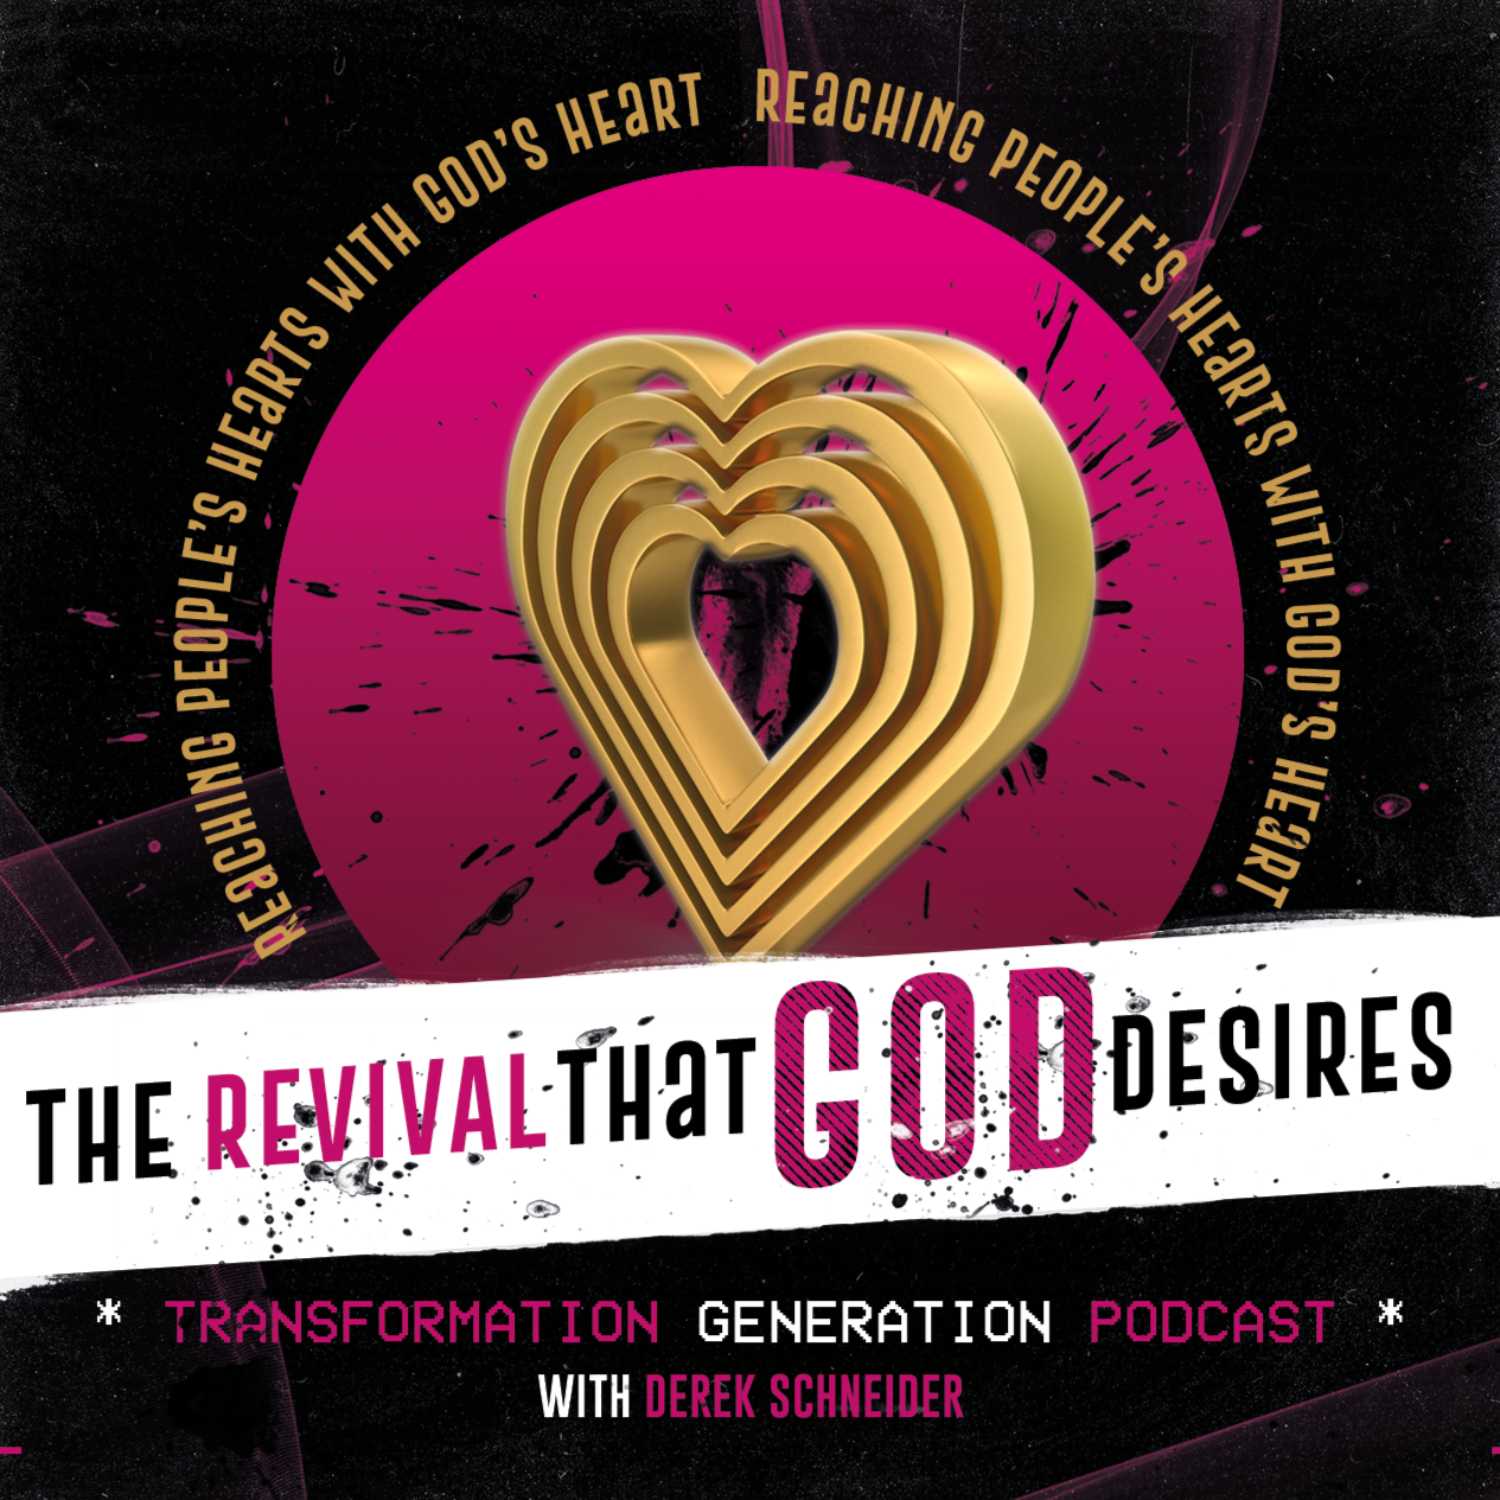 The Revival That God Desires